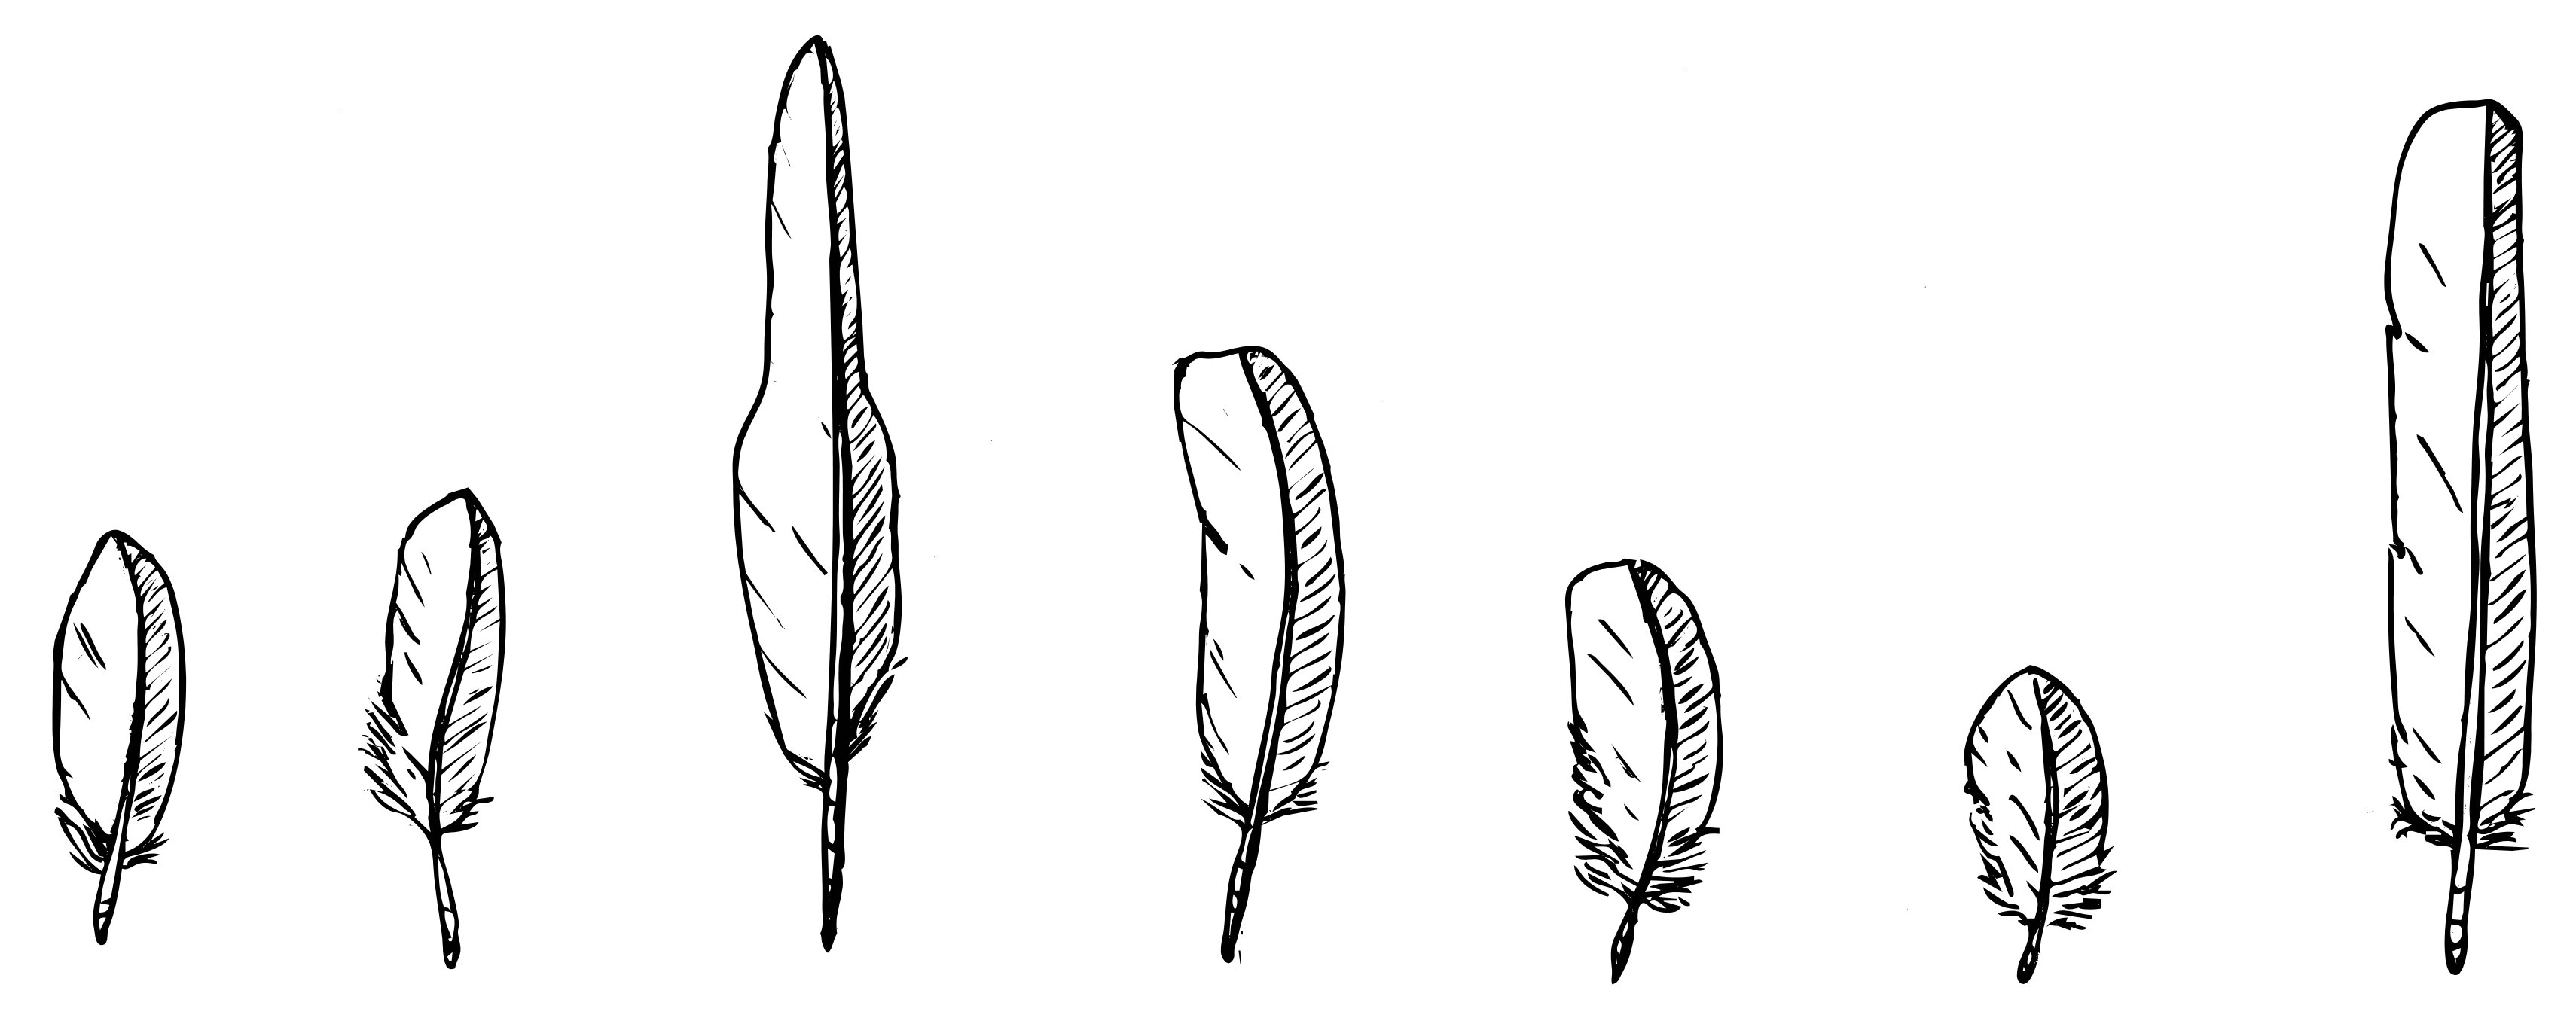 Sparrowhawk feathers